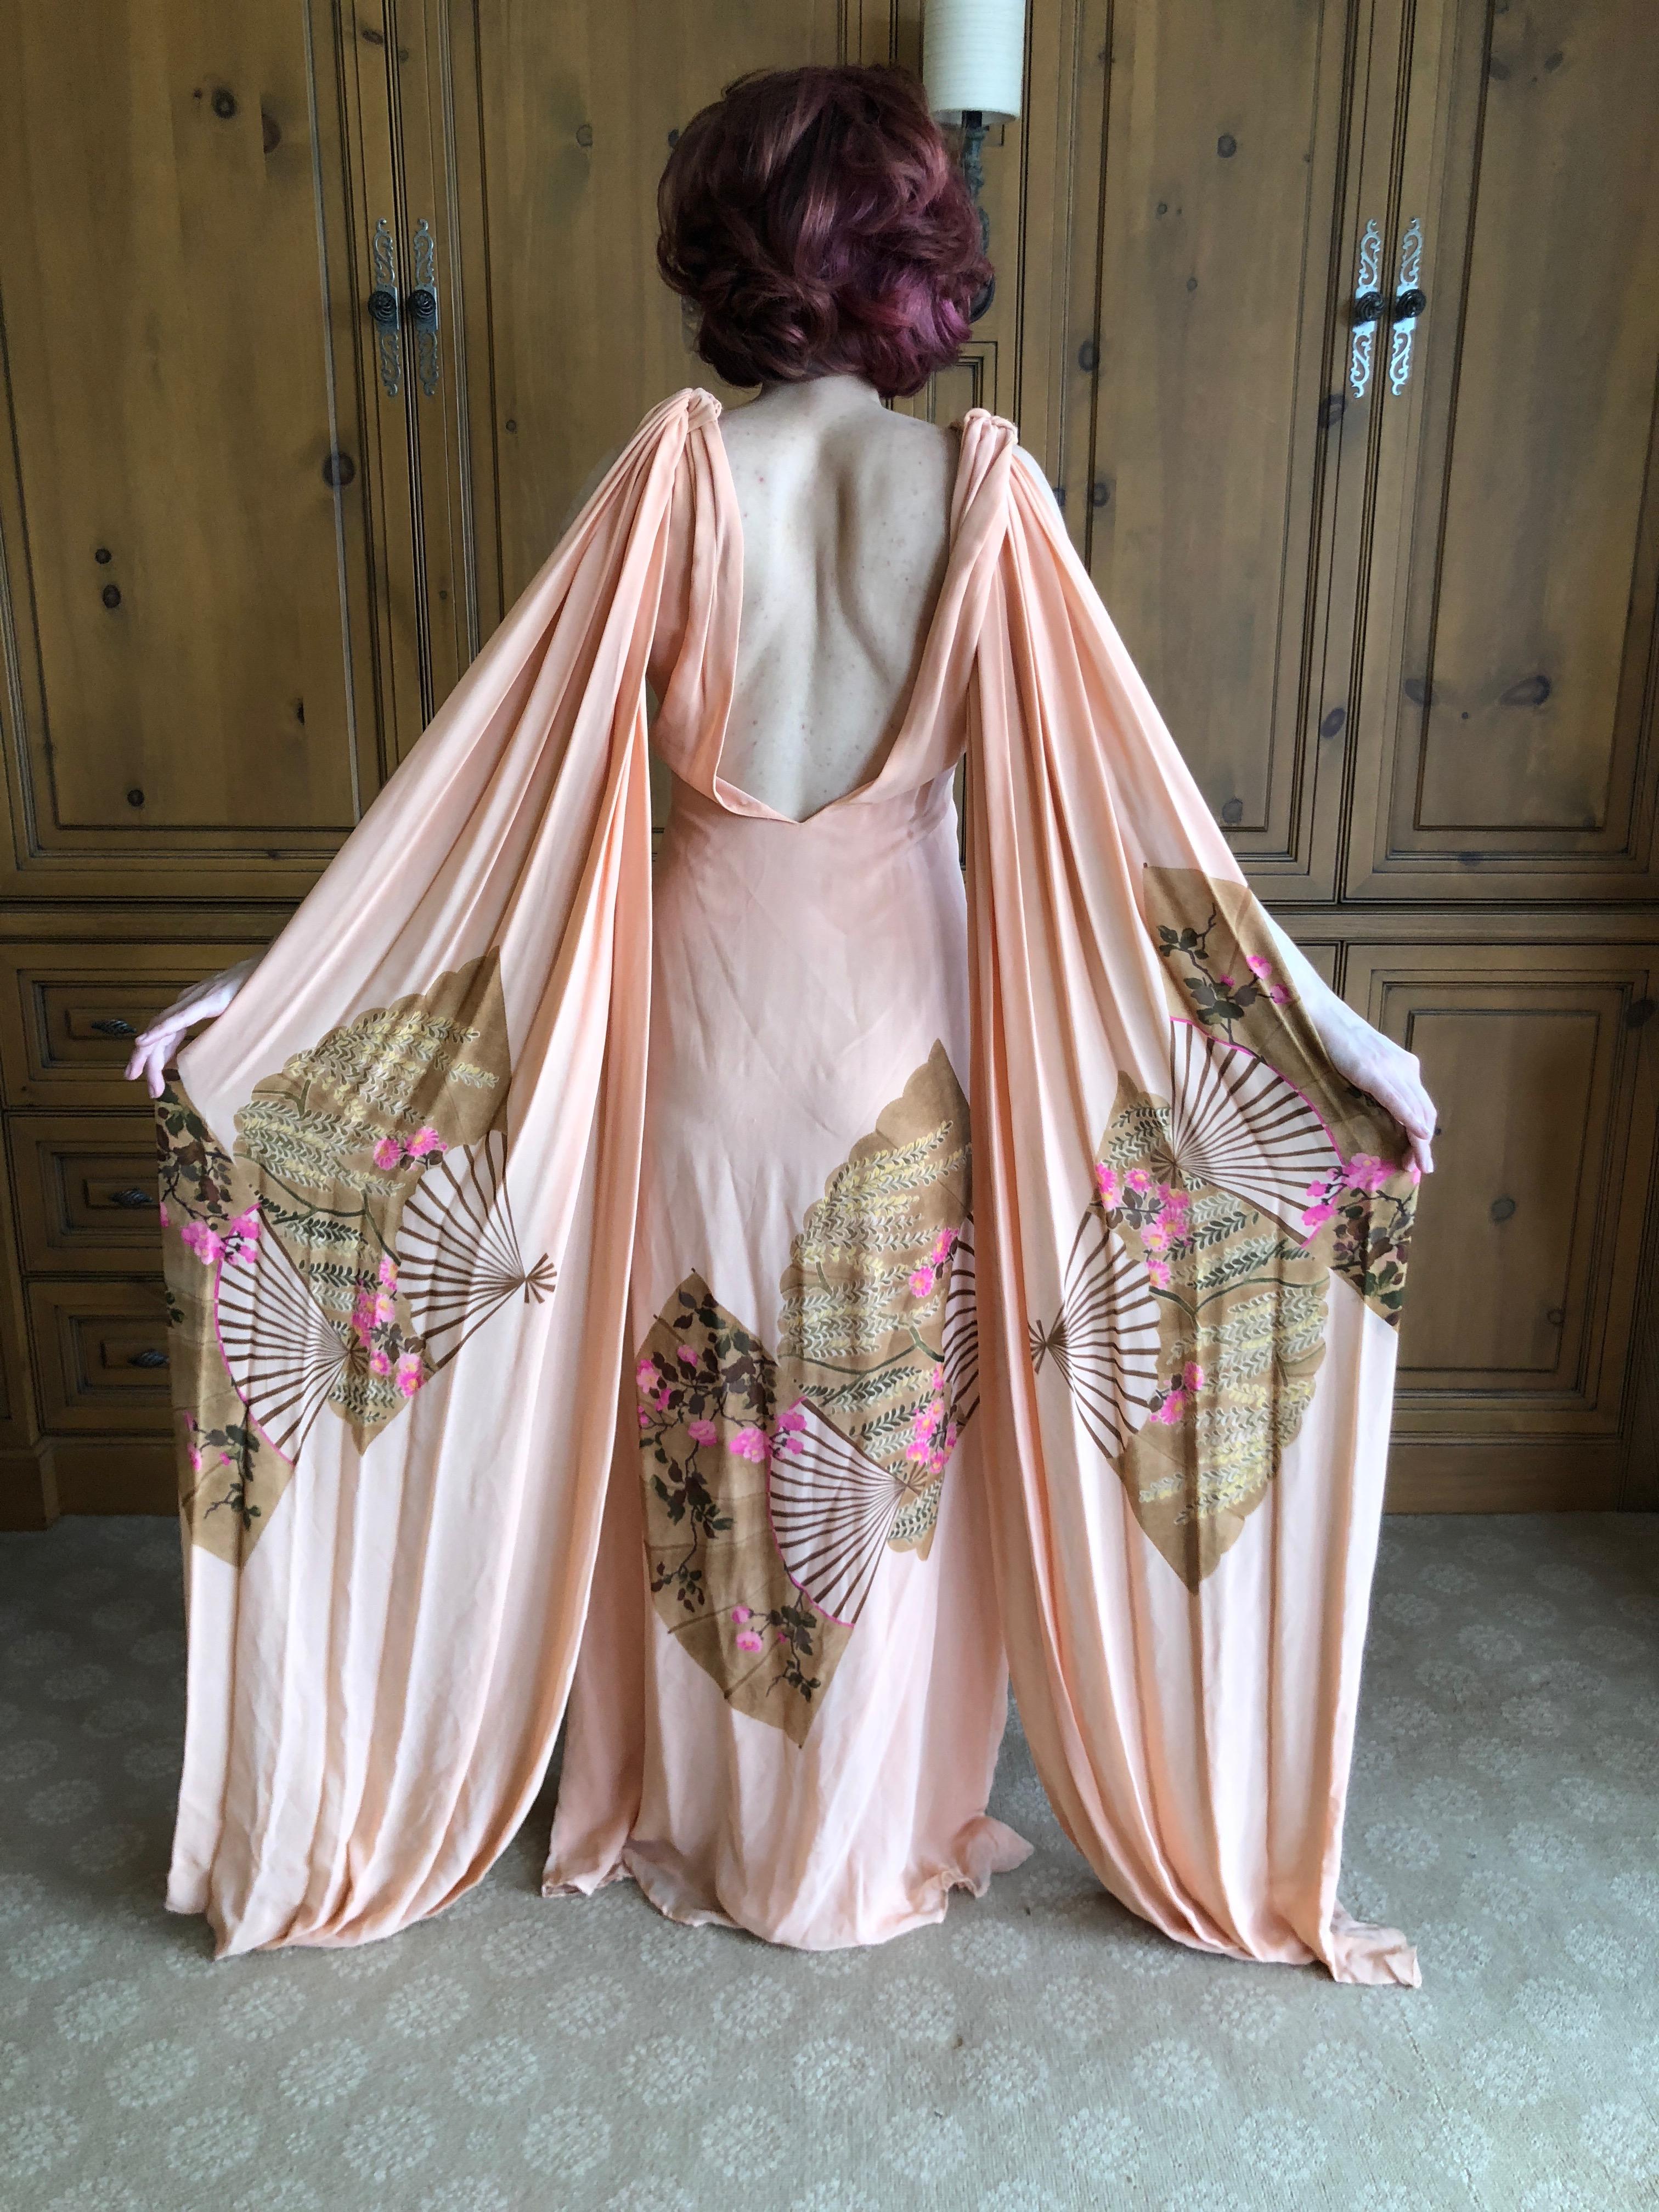 Cardinali Butterfly Pattern Evening Dress with Dramatic Draped Shoulder Capes 

From the Archive of Marilyn Lewis, the creator of Cardinali
Cardinali was founded in Los Angeles in 1970, by Marilyn Lewis, who had already found success as the founder